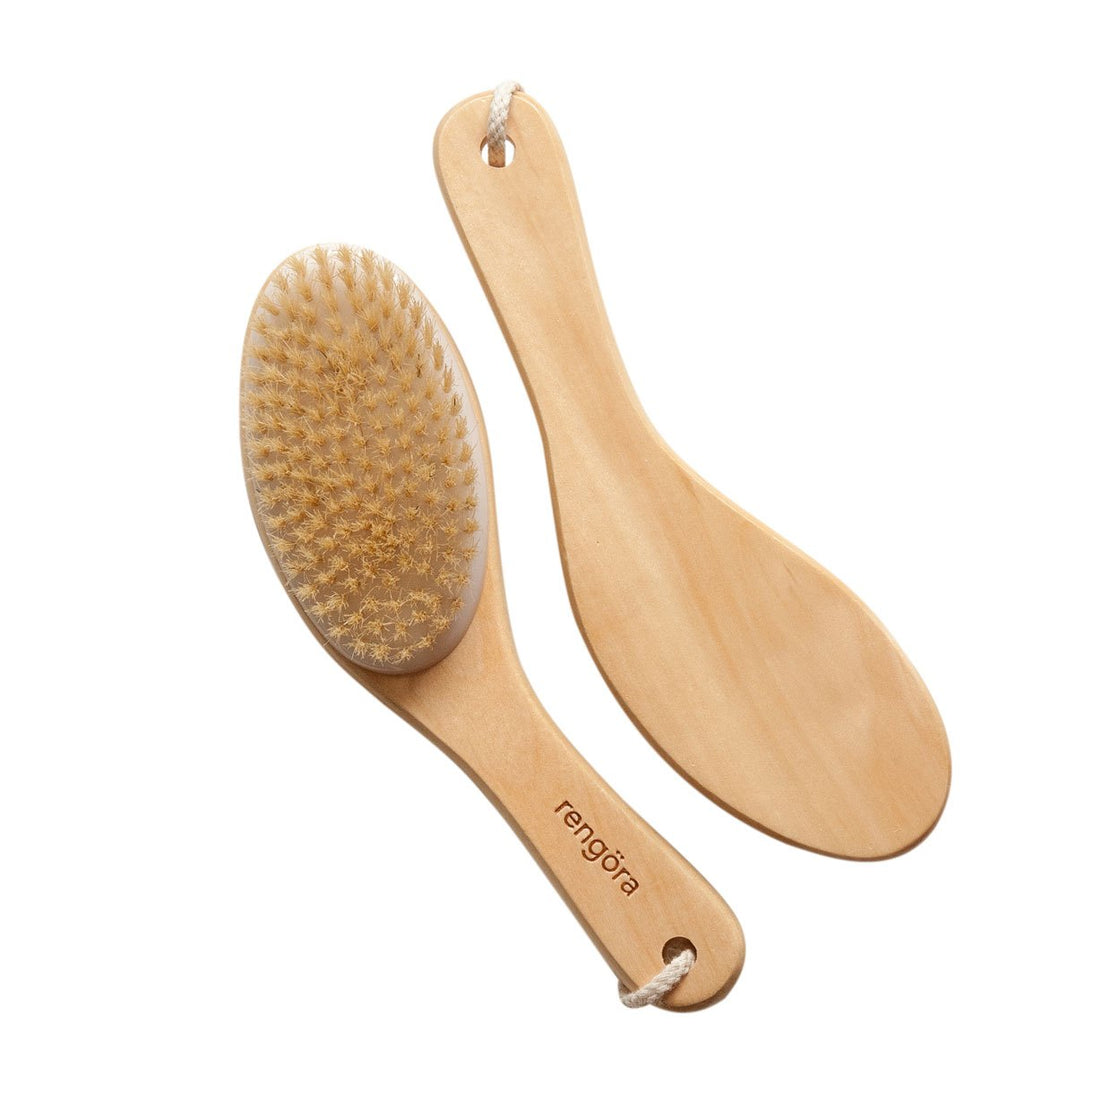 two of rengora's dry brushing body brush - showing the front and back sides